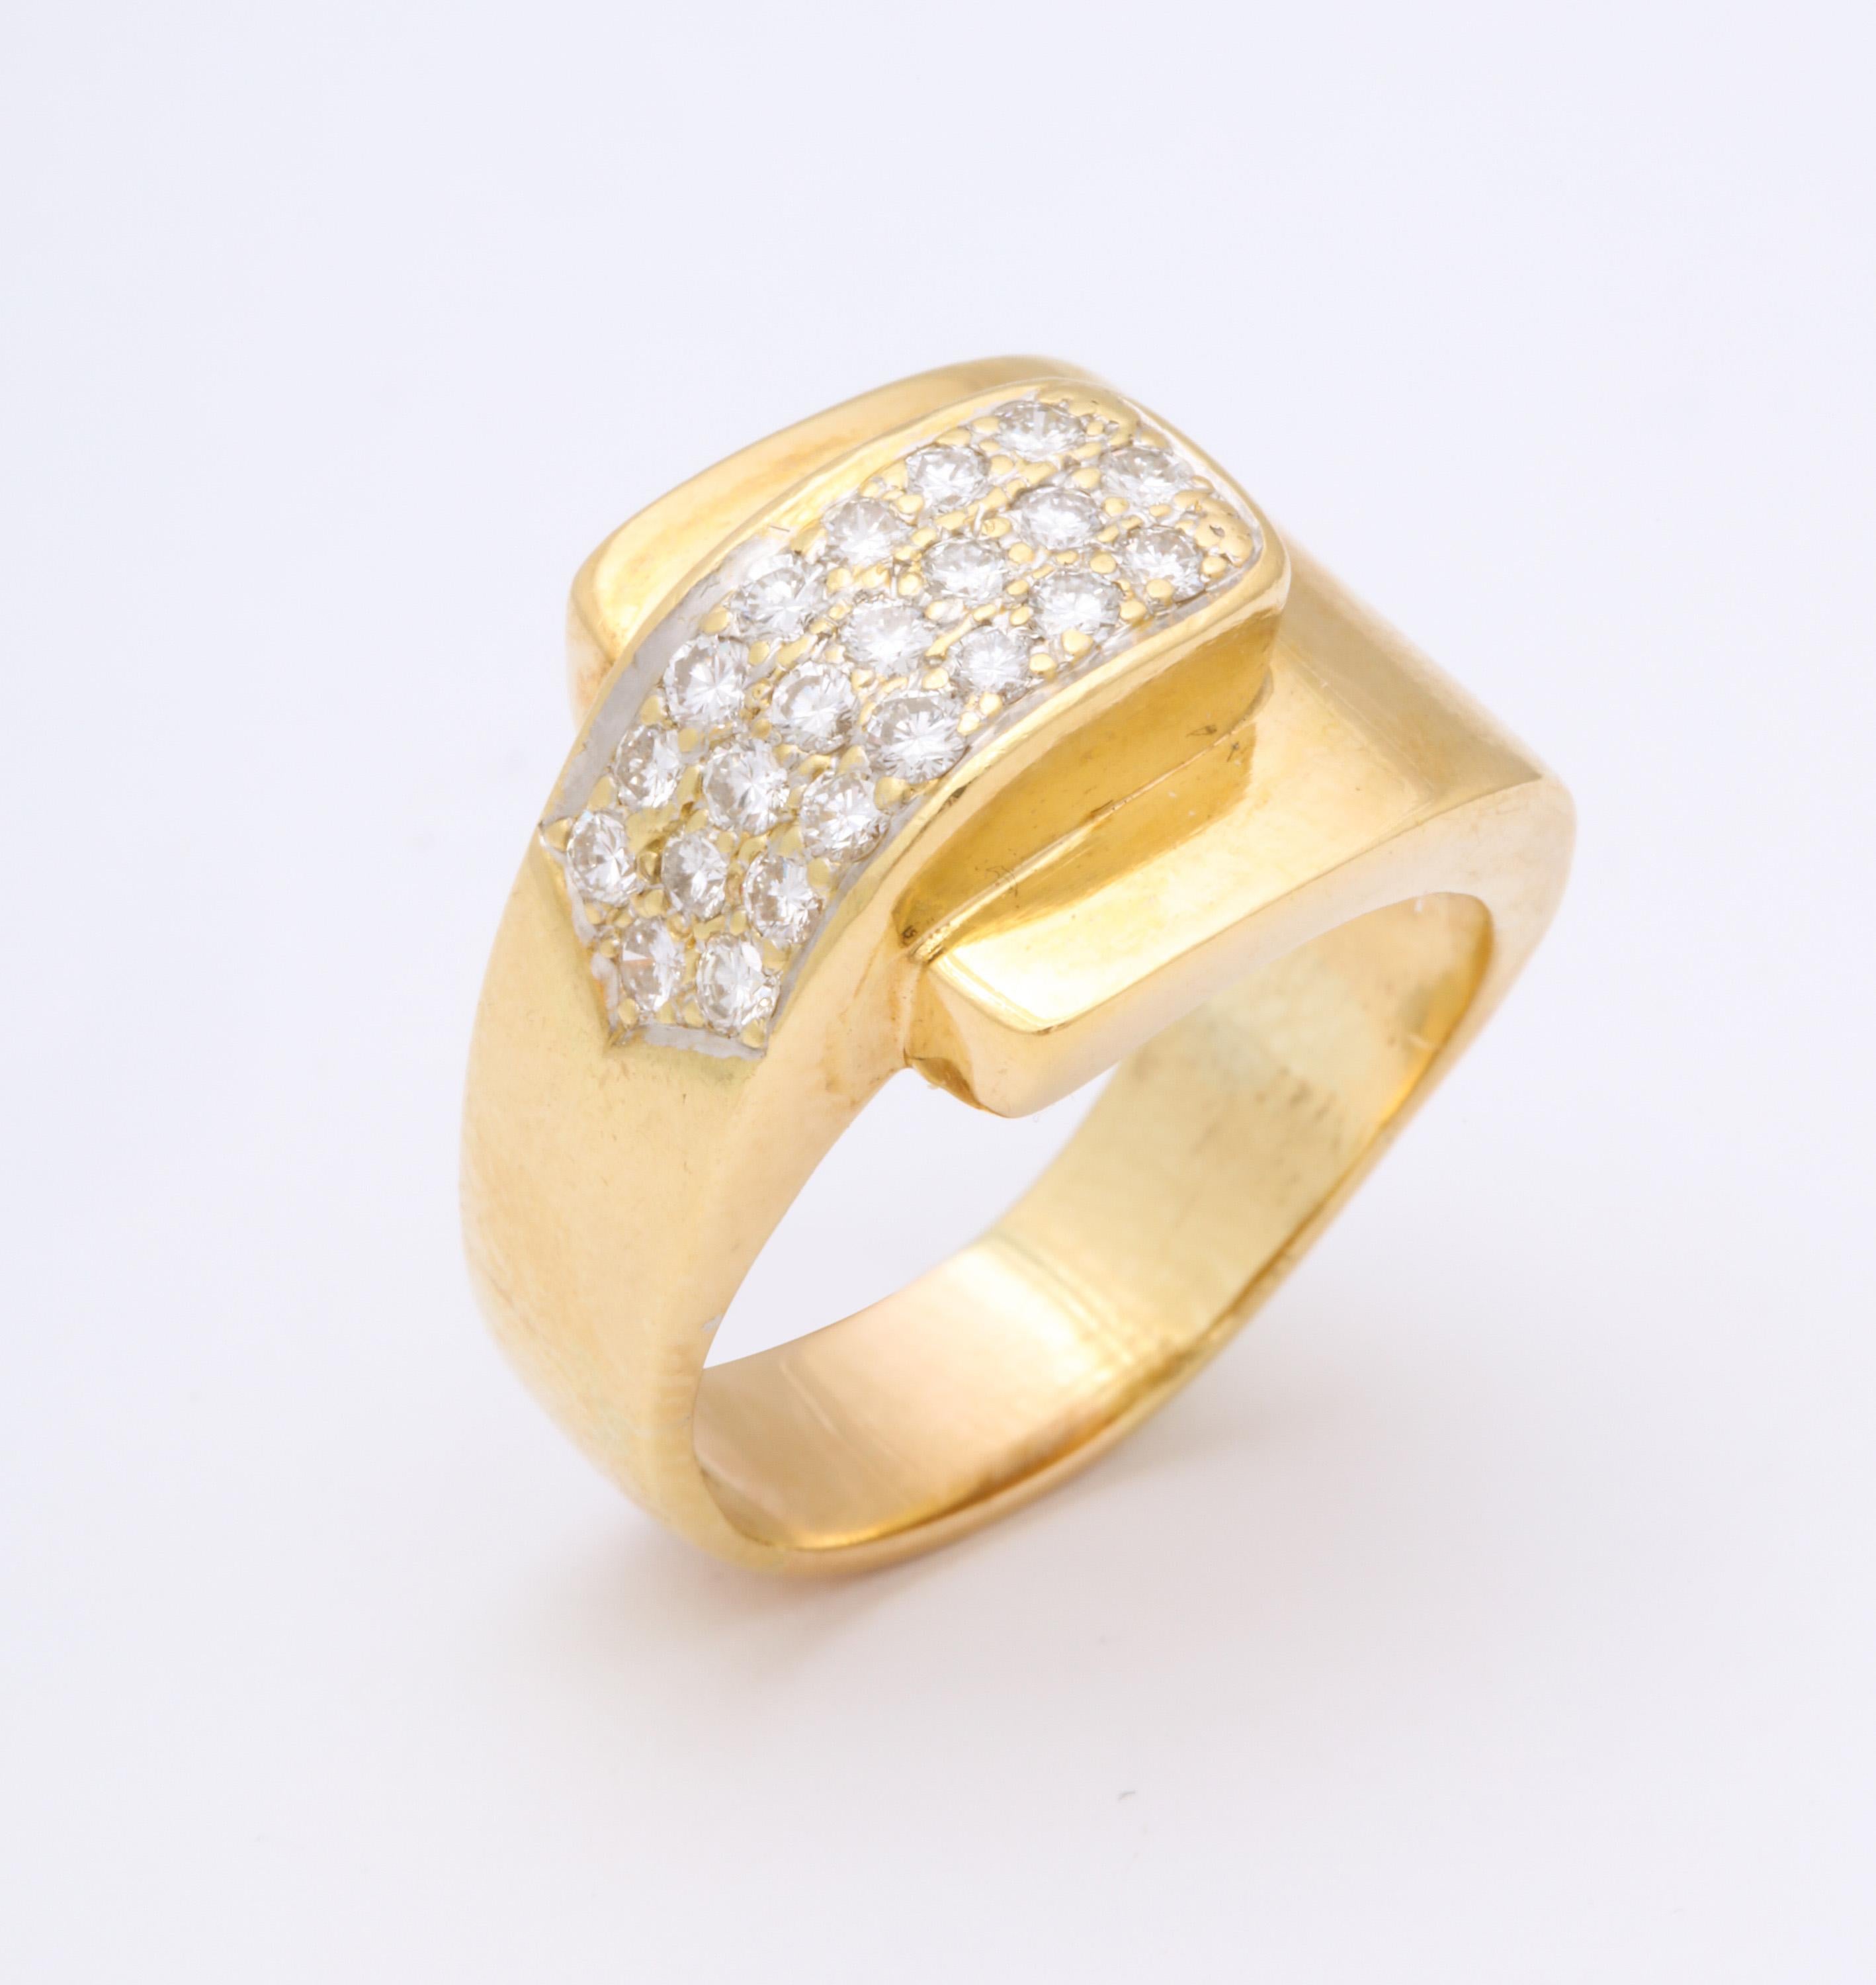 One 18kt High Polish Yellow Gold Buckle Design Ring Embellished With Approximately 1.50 Cts Of High Quality Brilliant Cut Diamonds. Created In The 1980's In Te United States Of America. Ring Size 8  May Be Easily Resized To any Size Required.